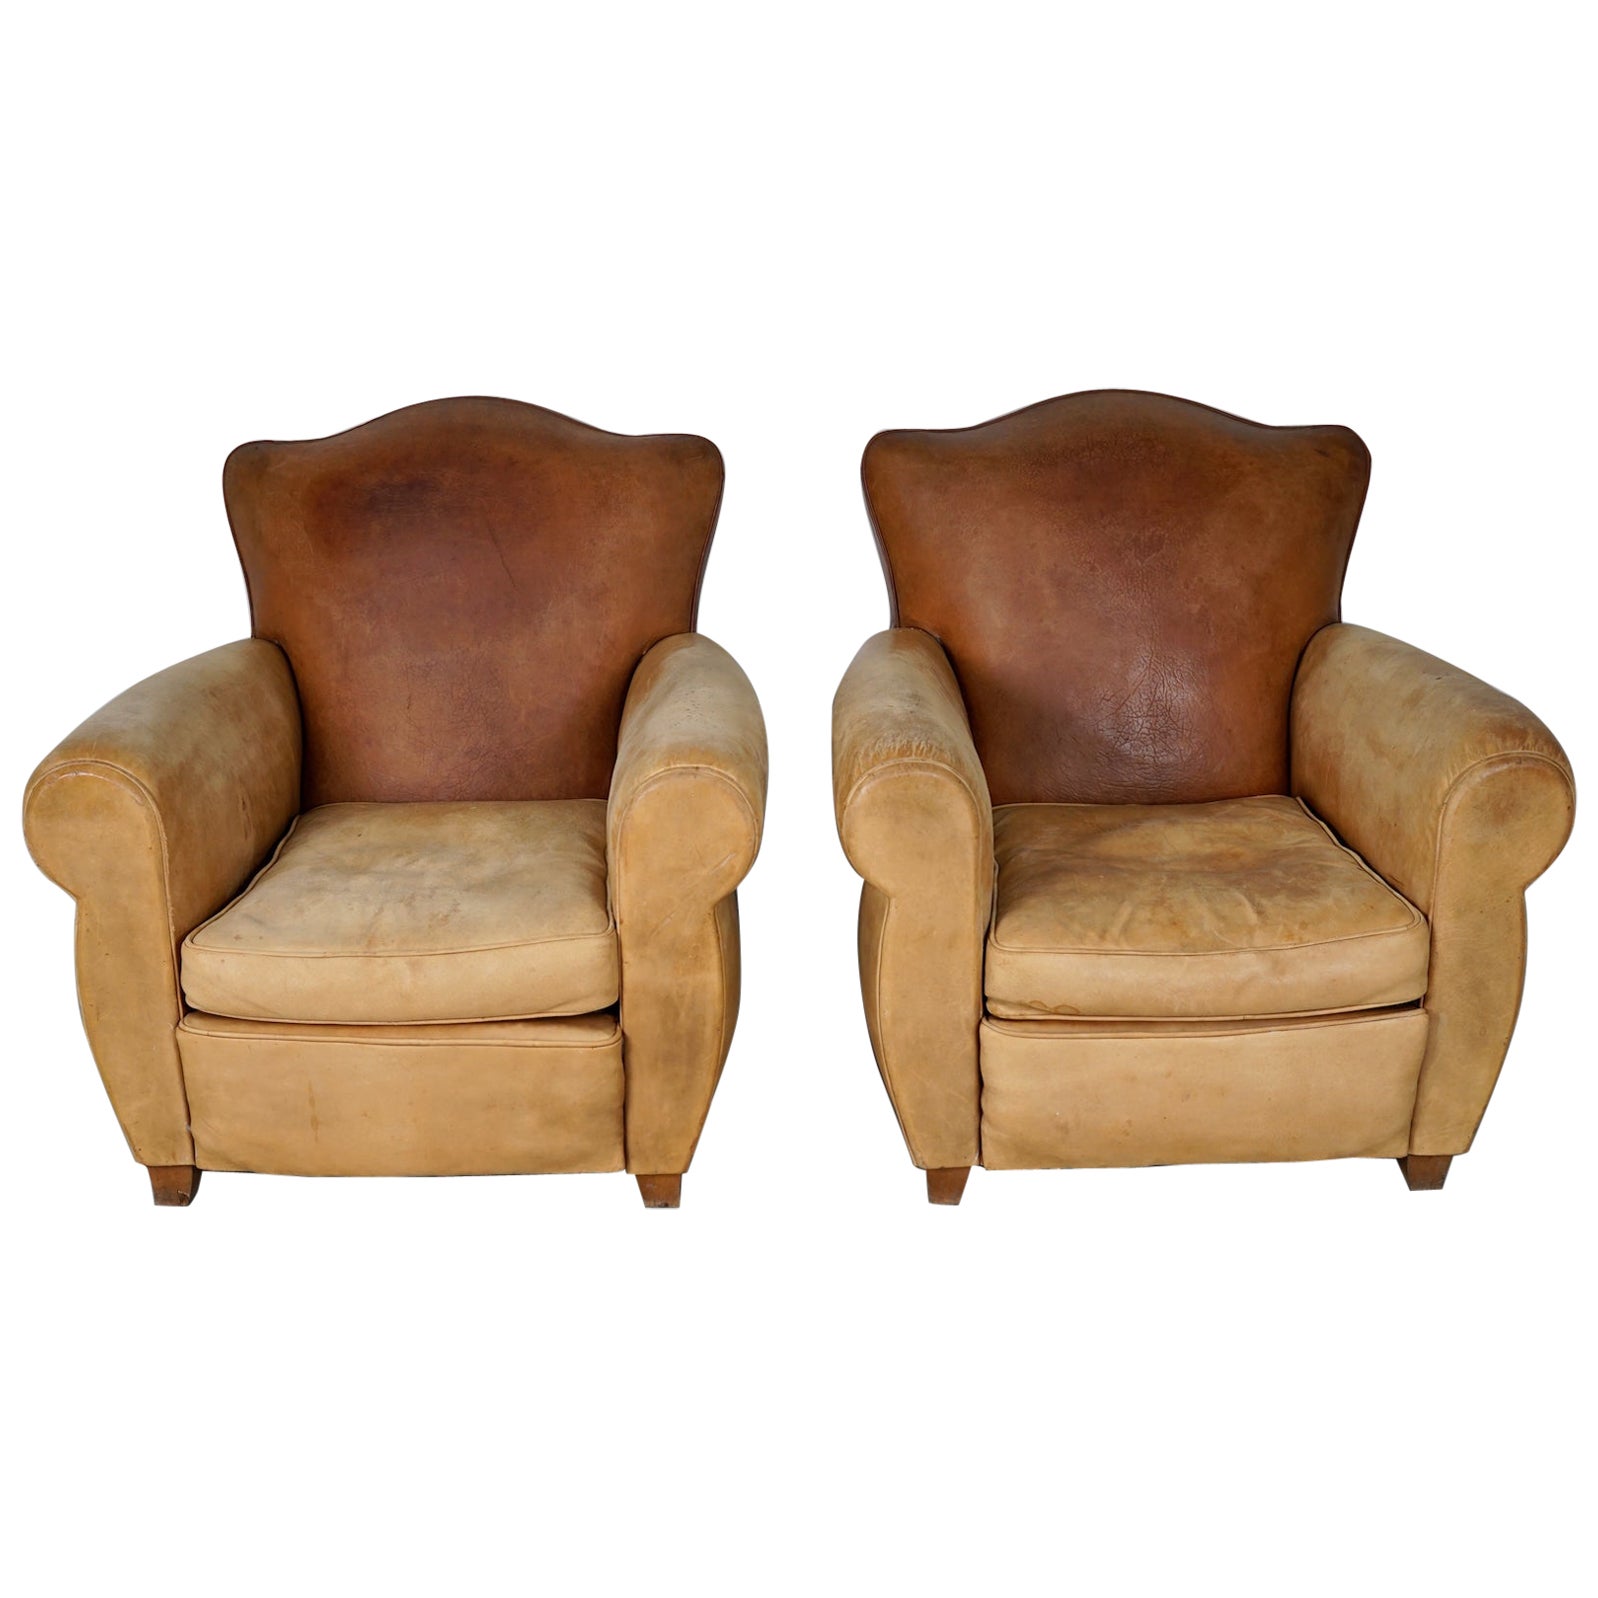  Pair of French Cognac Moustache Back Leather Club Chairs, 1940s For Sale